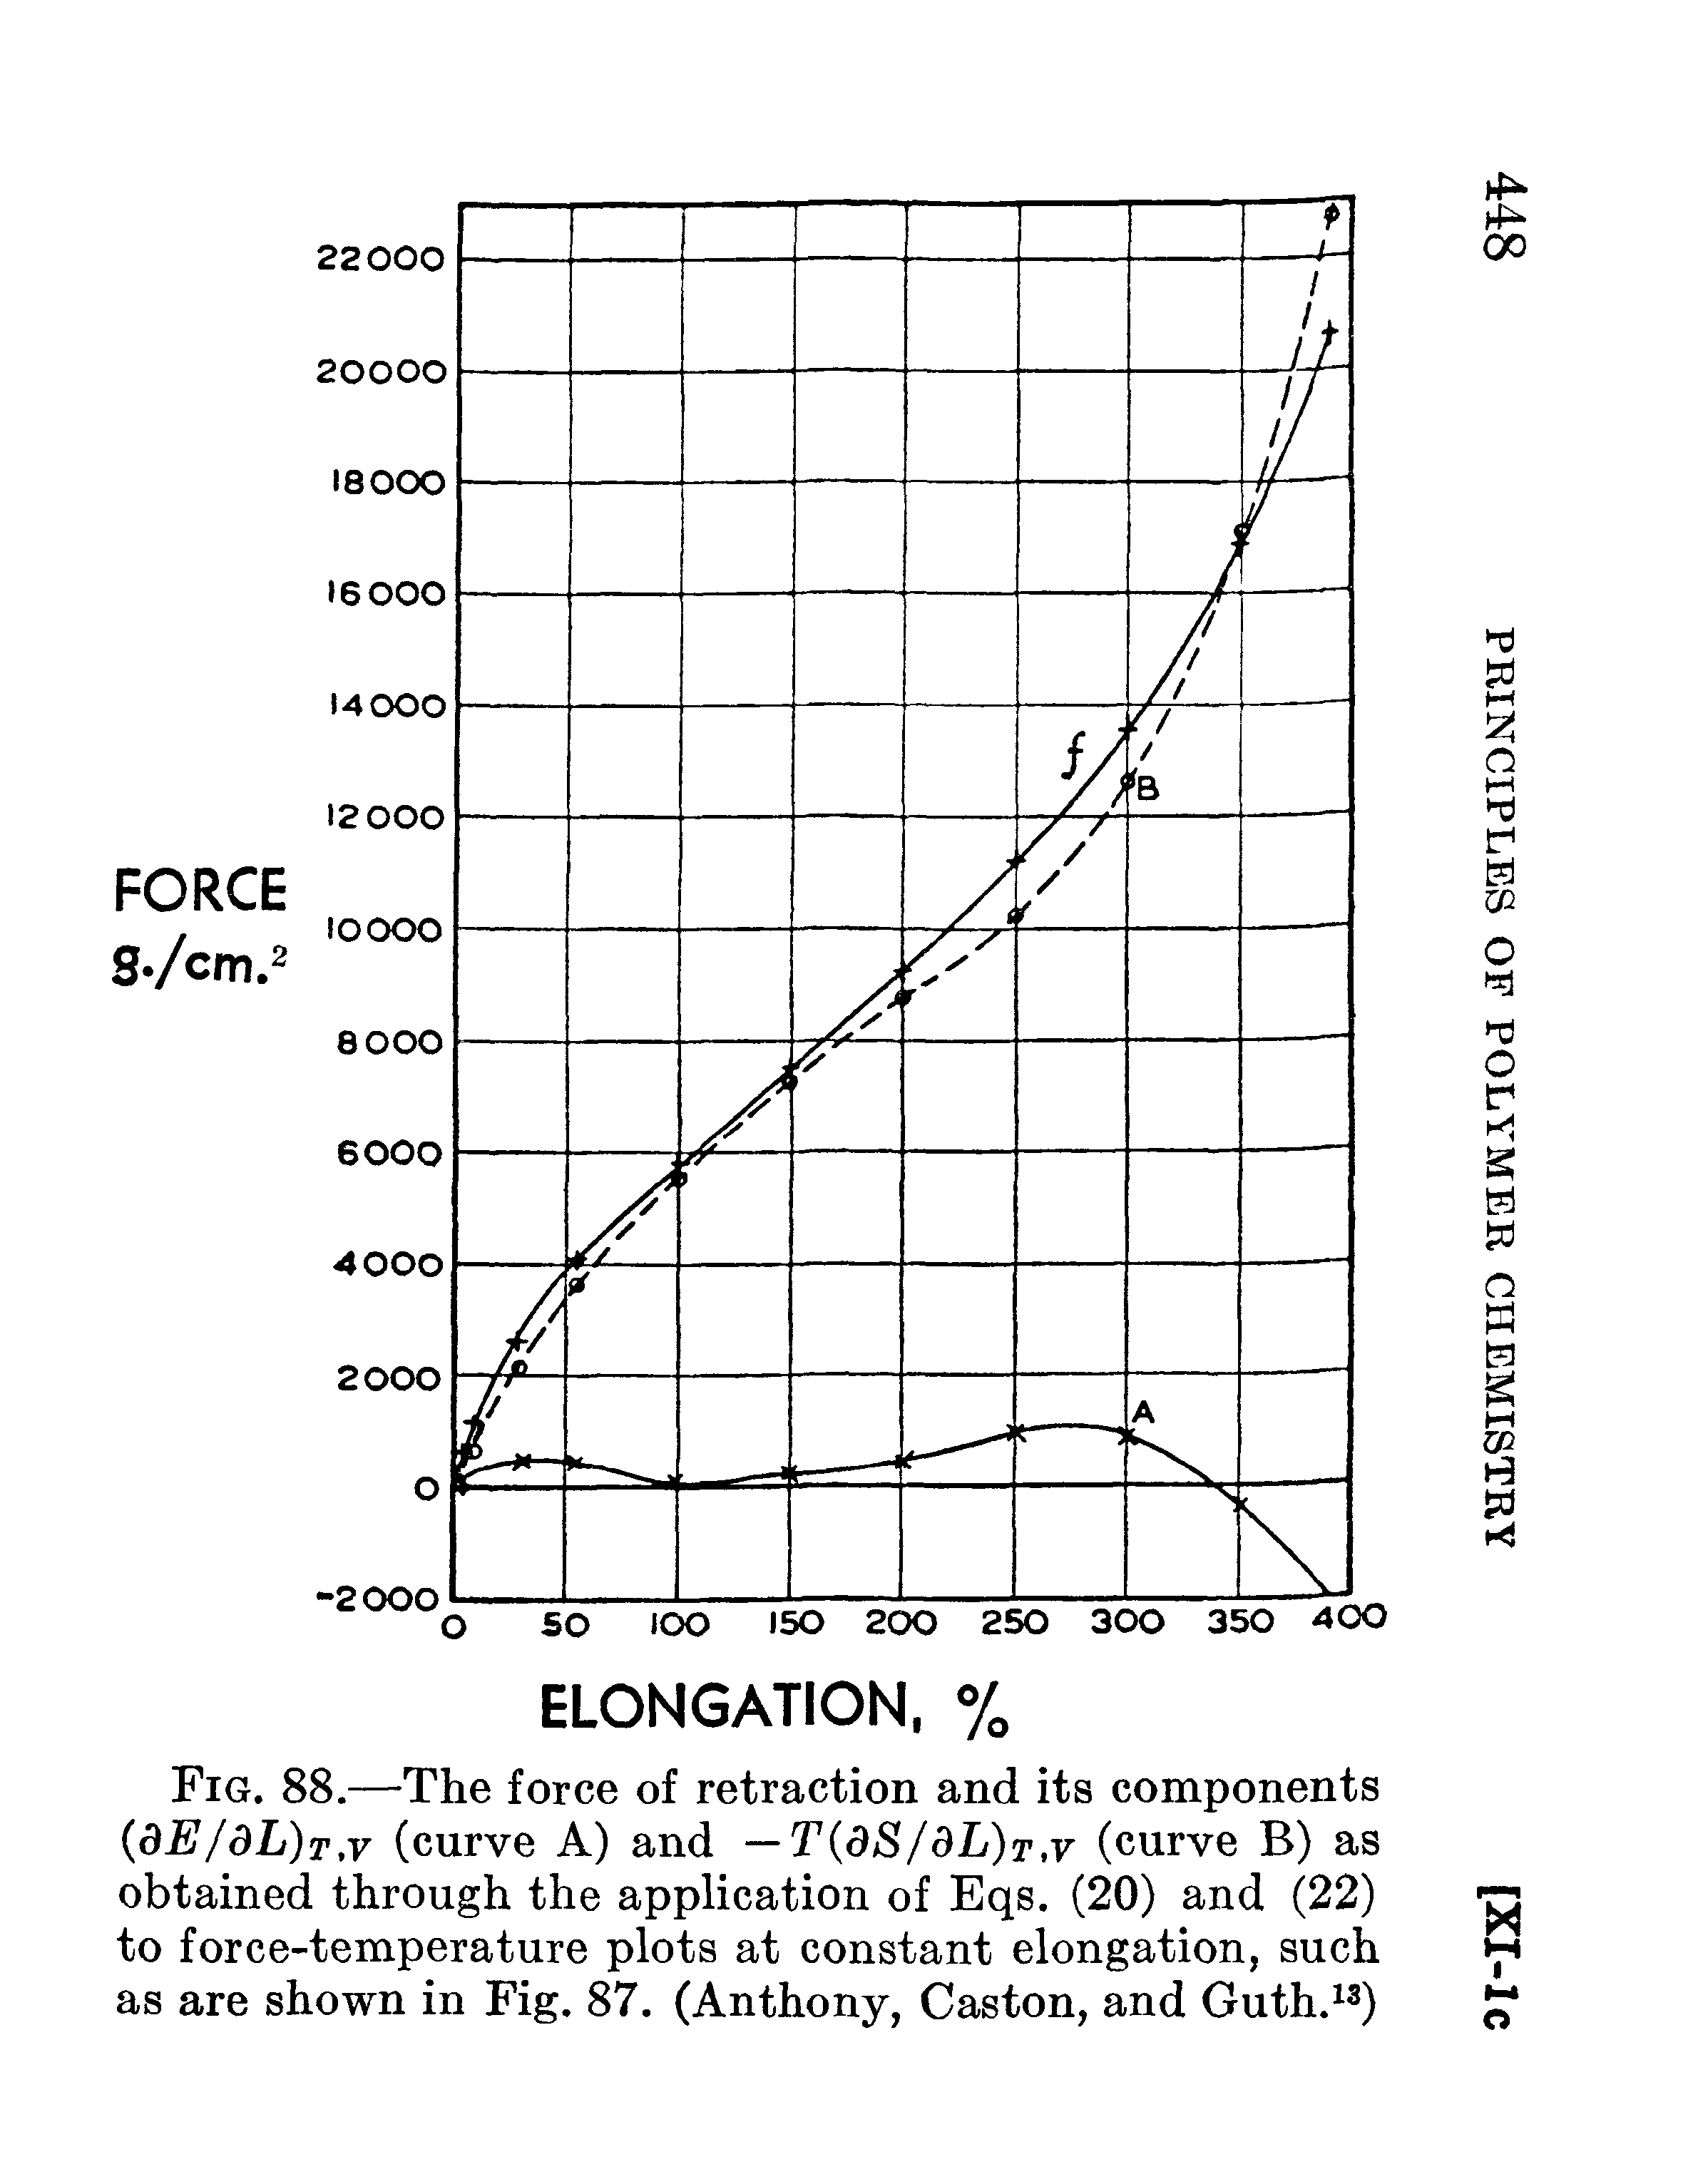 Fig. 88.—The force of retraction and its components dE/dL)T,v (curve A) and —T(dS/dL)T,v (curve B) as obtained through the application of Eqs. (20) and (22) to force-temperature plots at constant elongation, such as are shown in Fig. 87. (Anthony, Caston, and Guth. )...